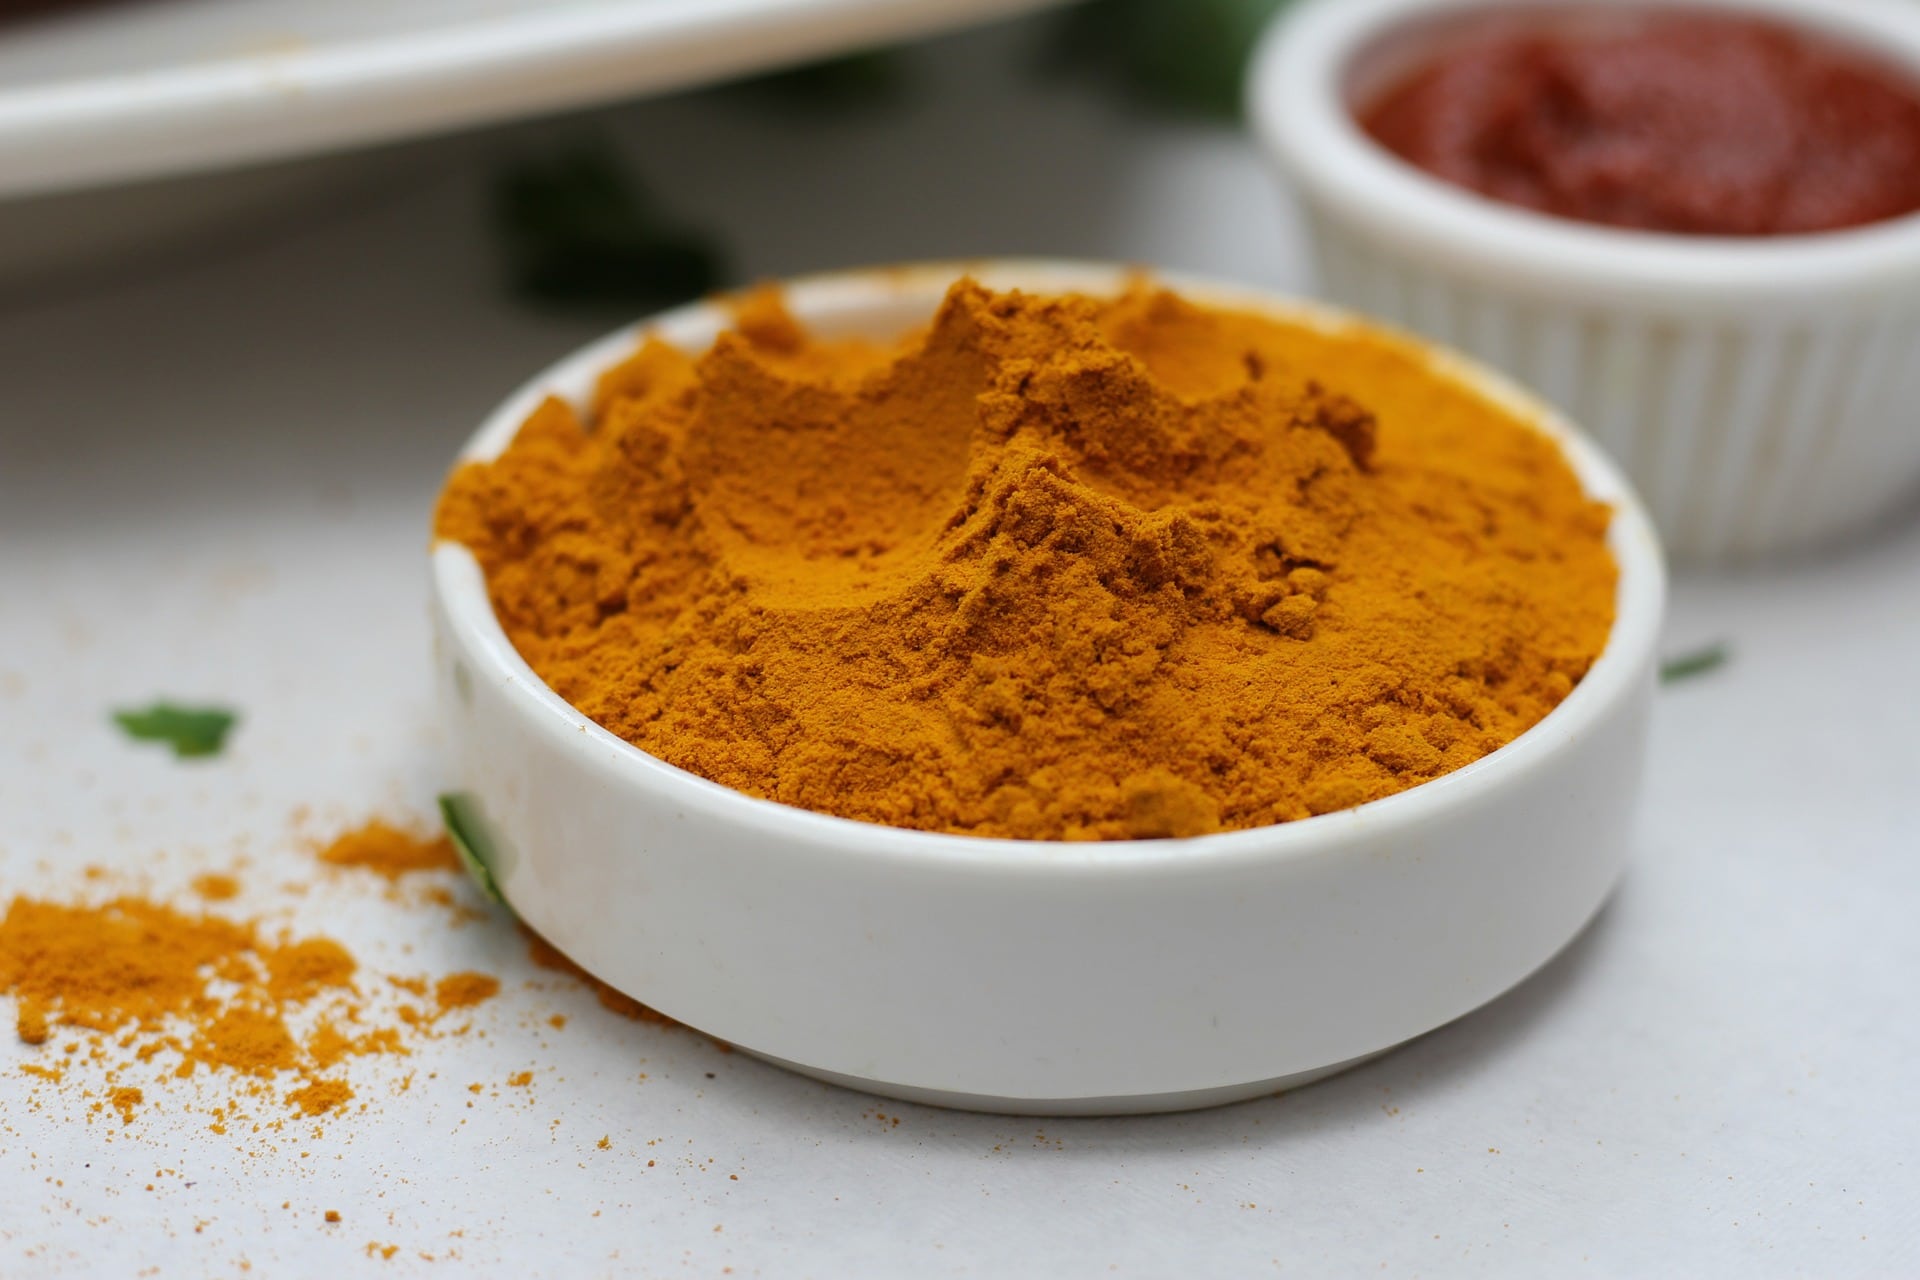 Side-effects of turmeric